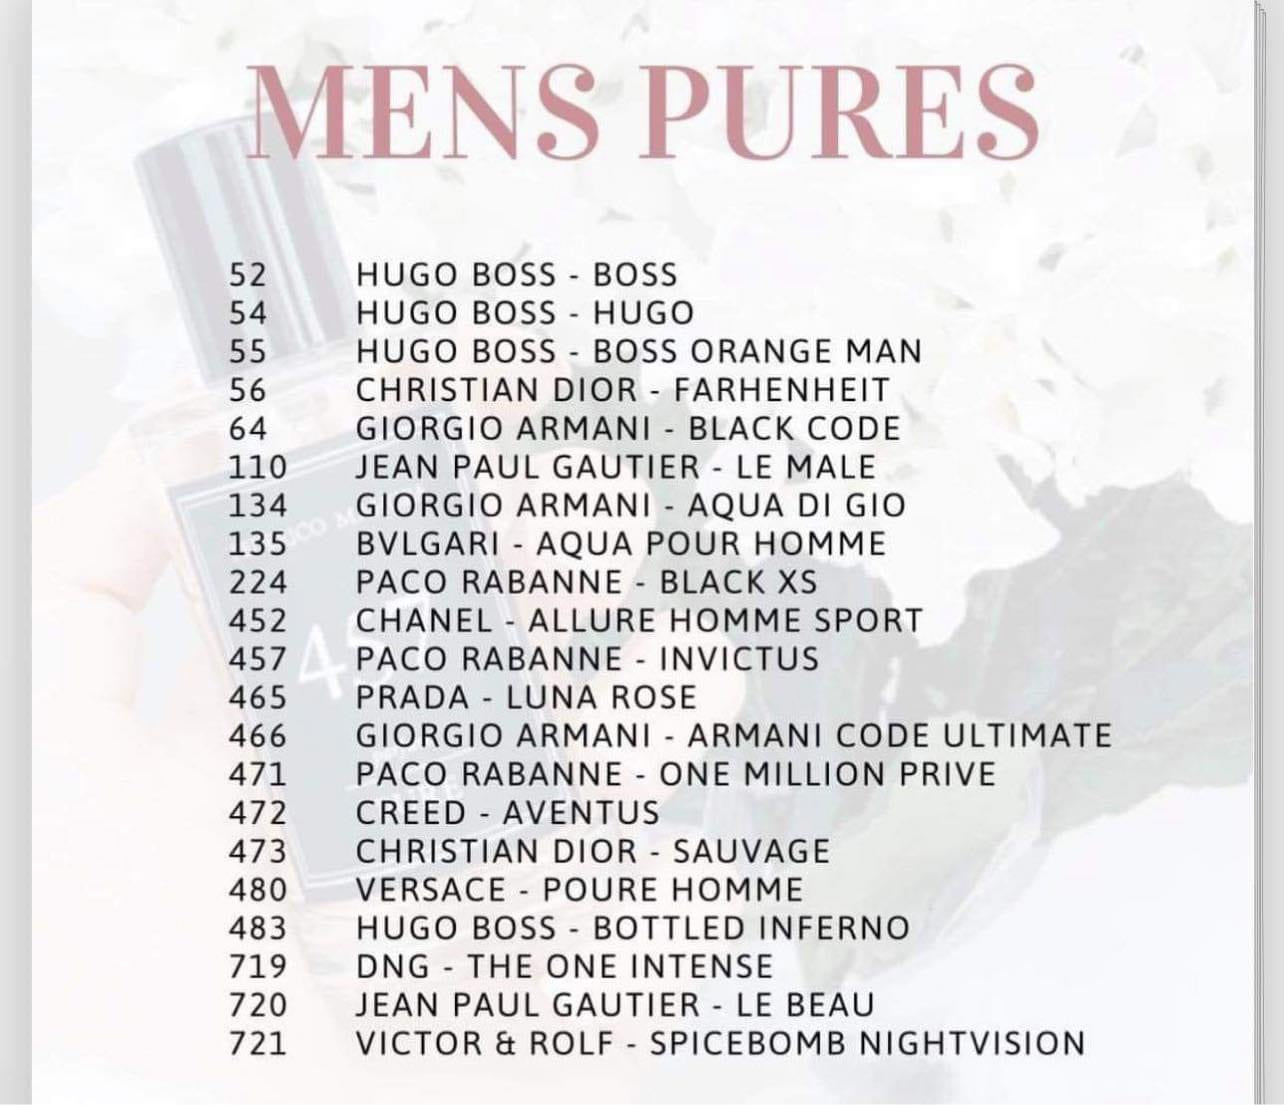 Pure Collection for Him - Full List (PREORDER - ETA 2 WEEKS)